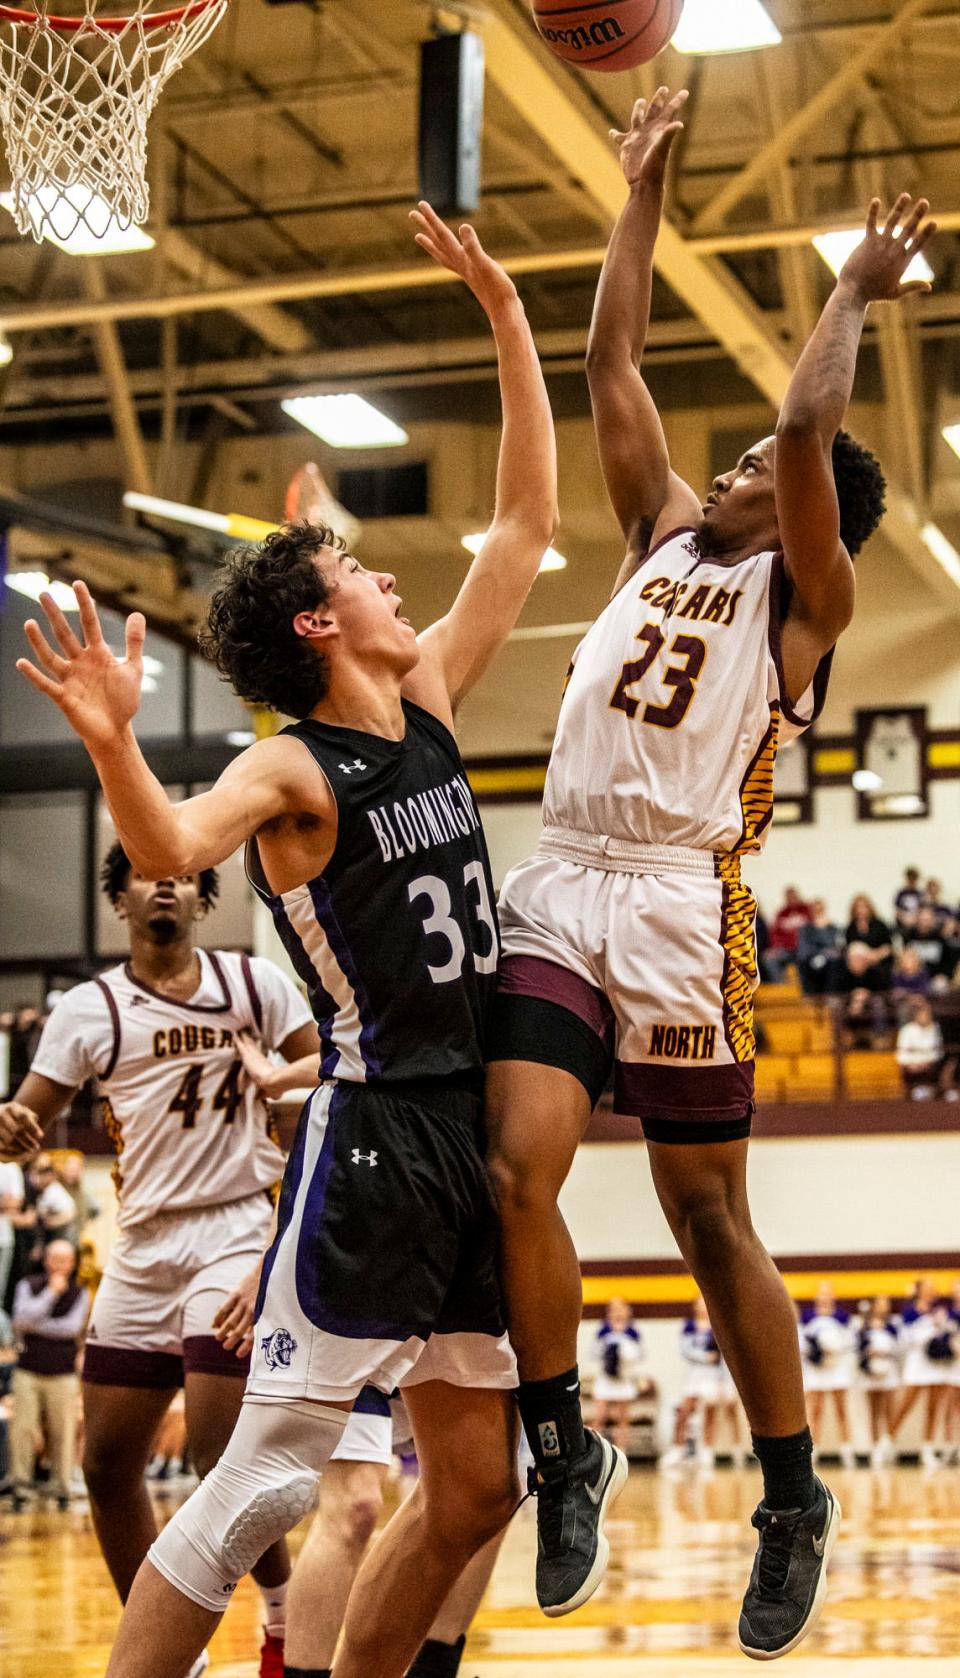 North's Christopher Vaughns Jr. (23) shoots over South's Matt Tierney (33) during the Bloomington North versus Bloomington South boys basketball game at Bloomington High School North on Friday, Jan. 5, 2024. North won the game 56-53.